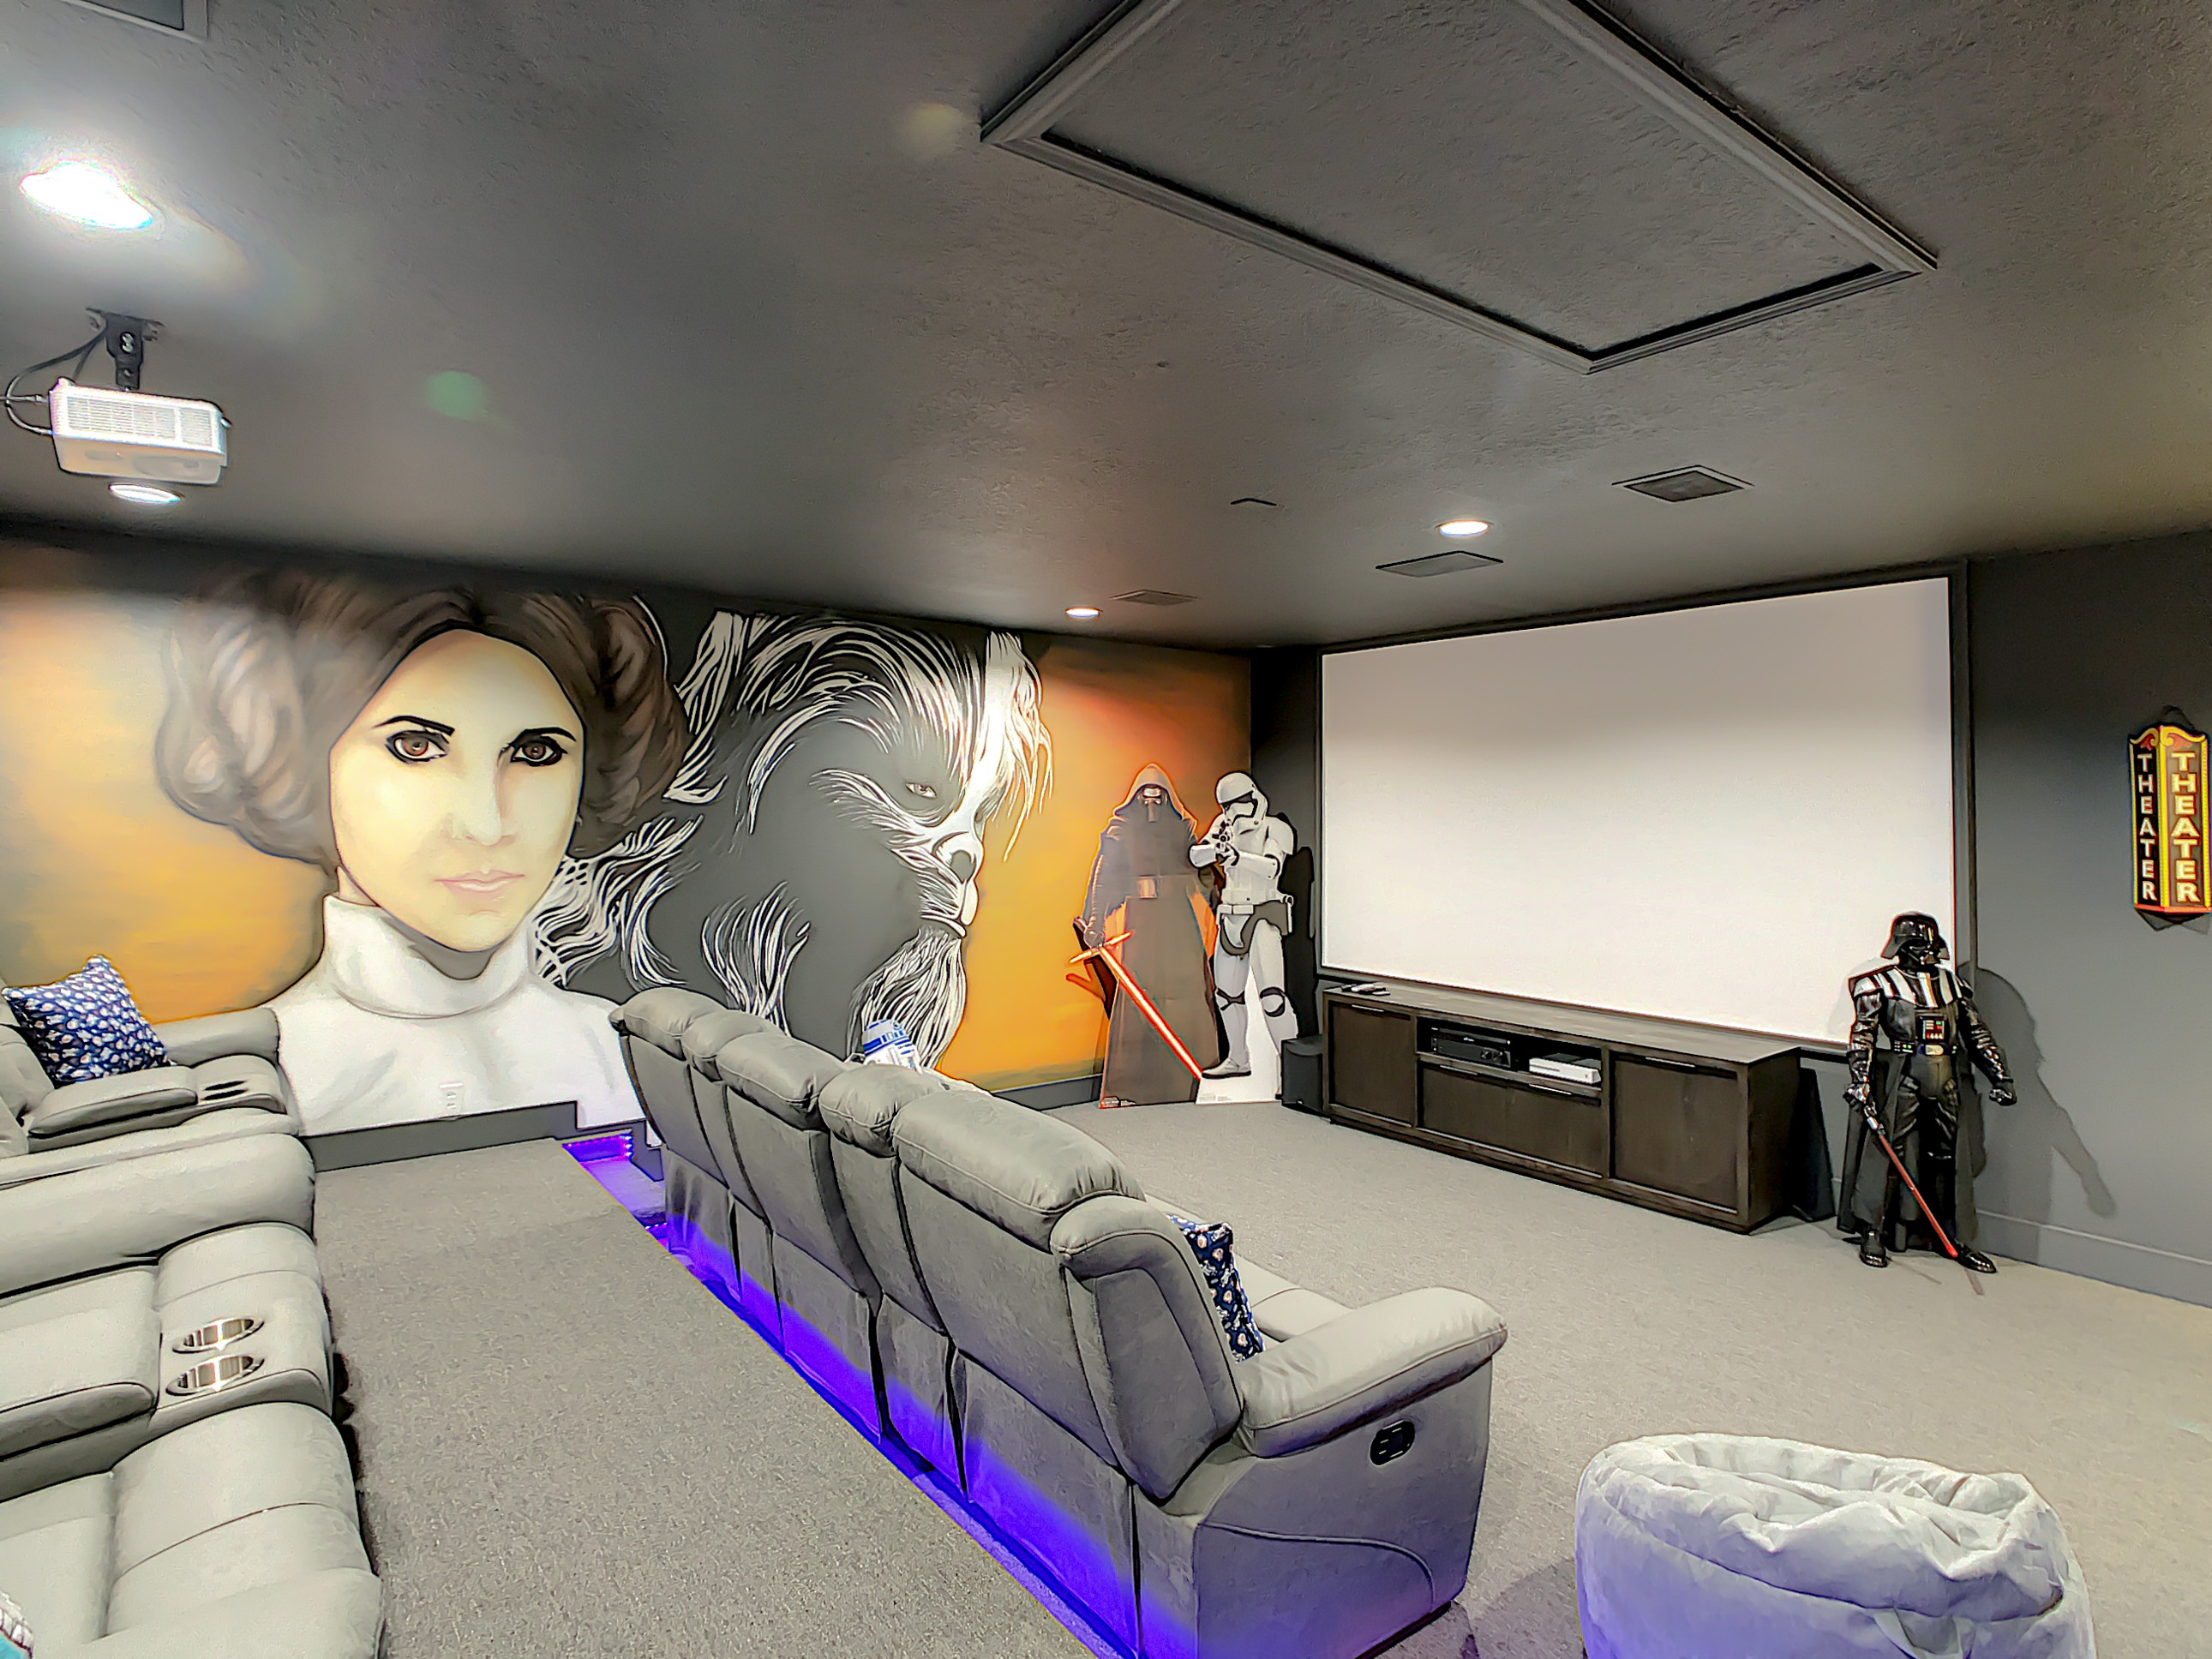 This High-End Davenport, FL Vacation Property Features A Star Wars Home Cinema